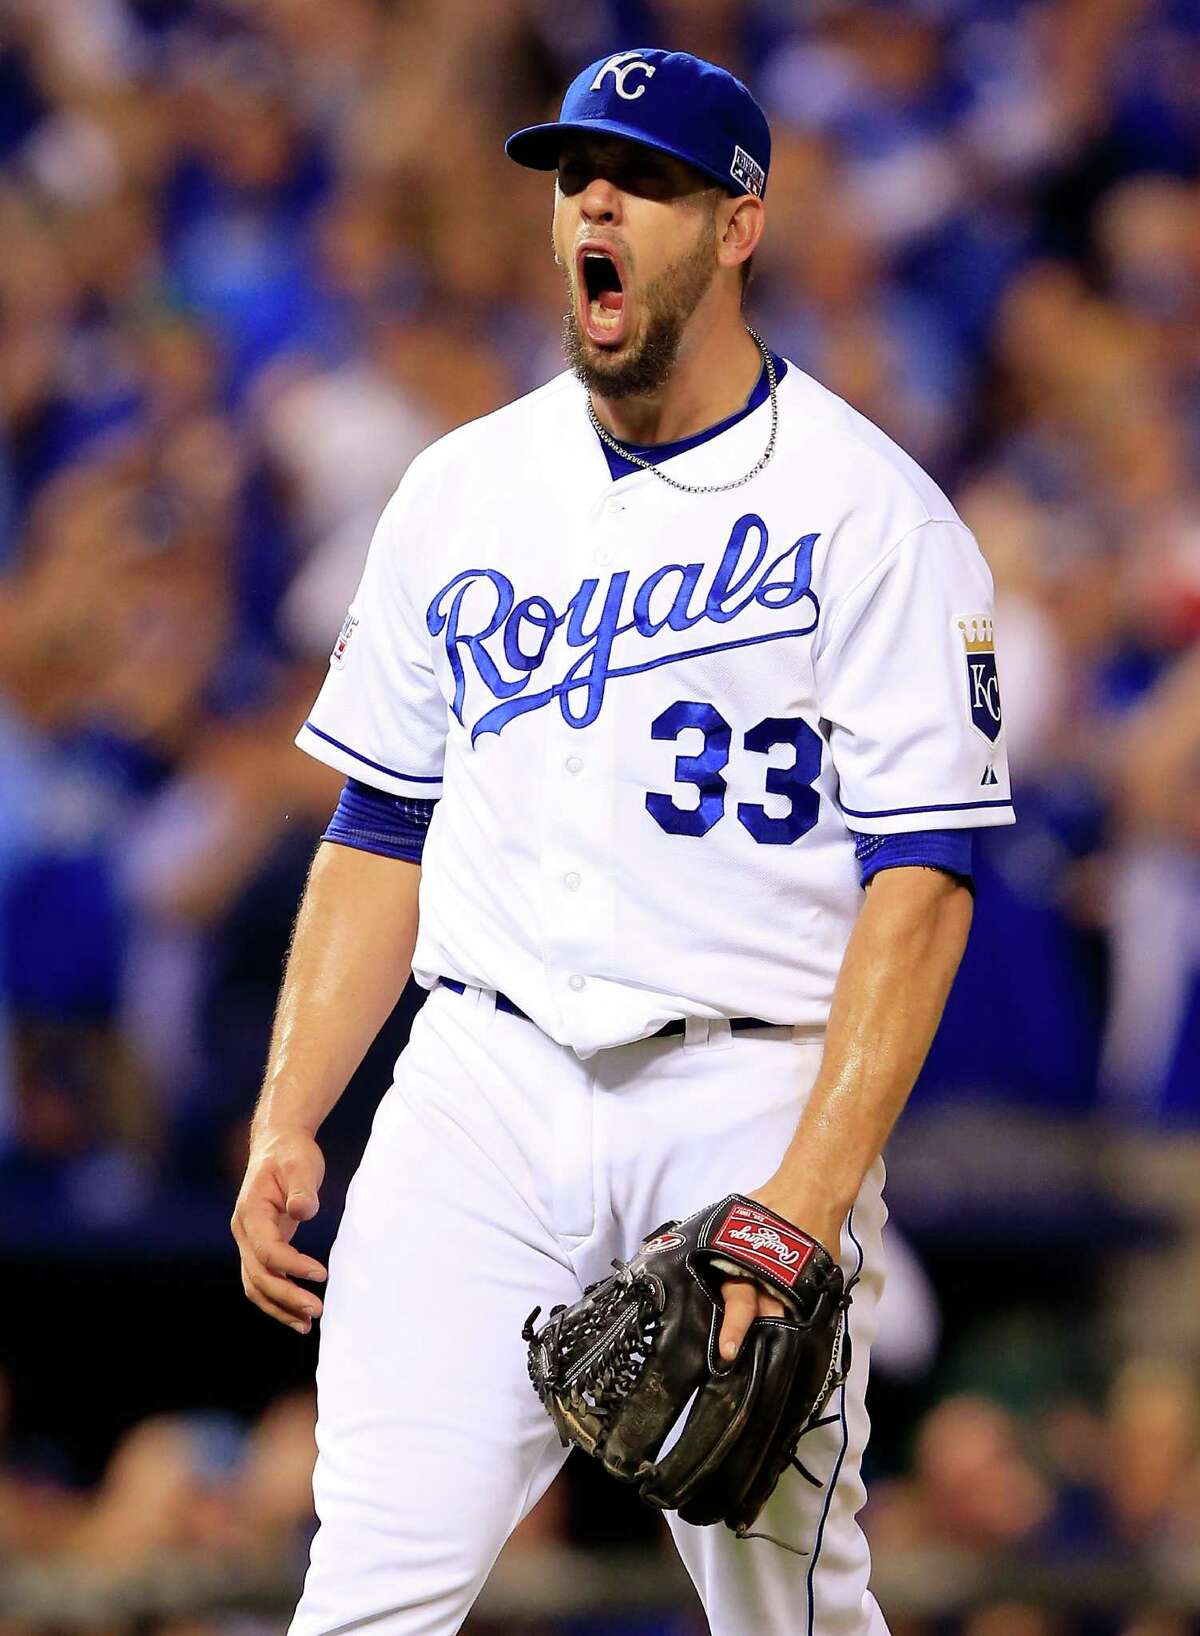 KANSAS CITY, MO - OCTOBER 05: James Shields #33 of the Kansas City Royals reacts after a strikeout to end the top of the sixth inning against the Los Angeles Angels during Game Three of the American League Division Series at Kauffman Stadium on October 5, 2014 in Kansas City, Missouri. (Photo by Jamie Squire/Getty Images)